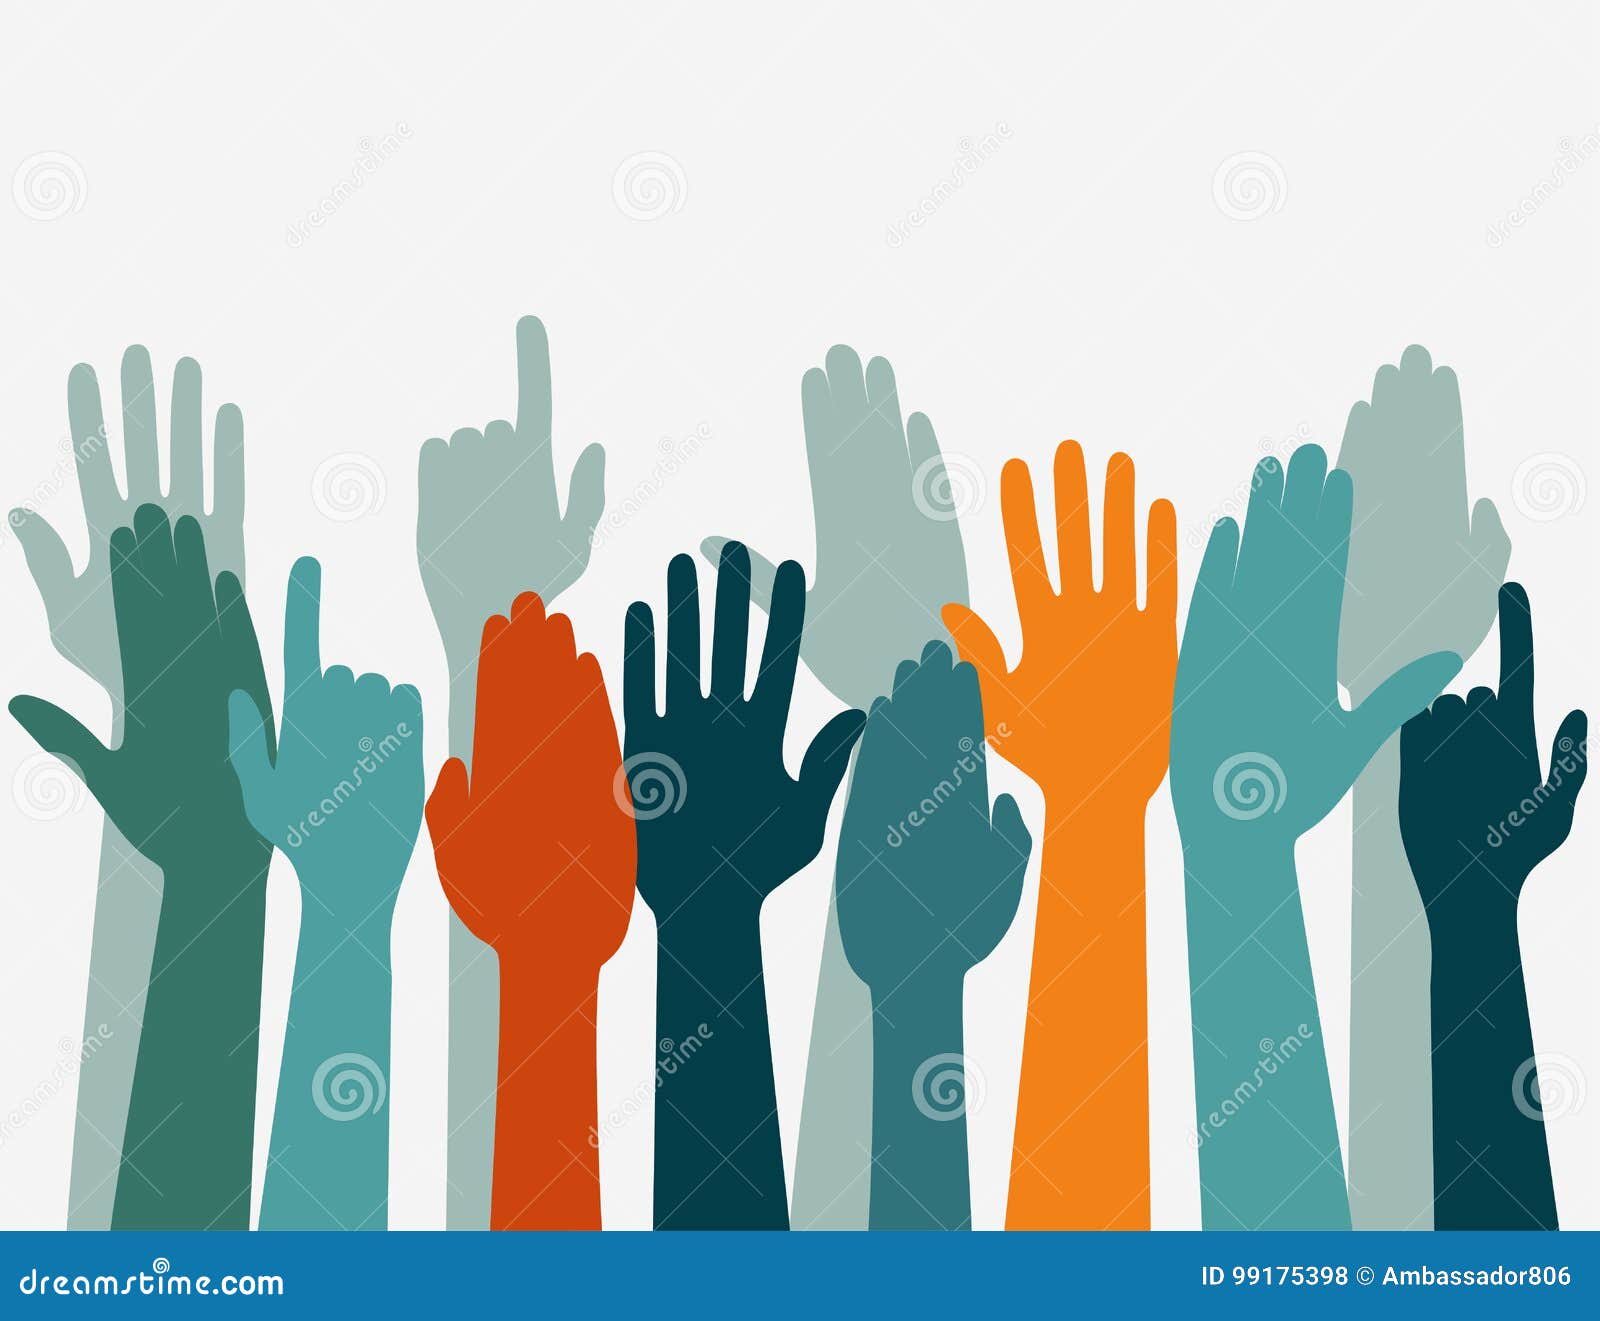 voting hand raised up, election concept. arms in the top